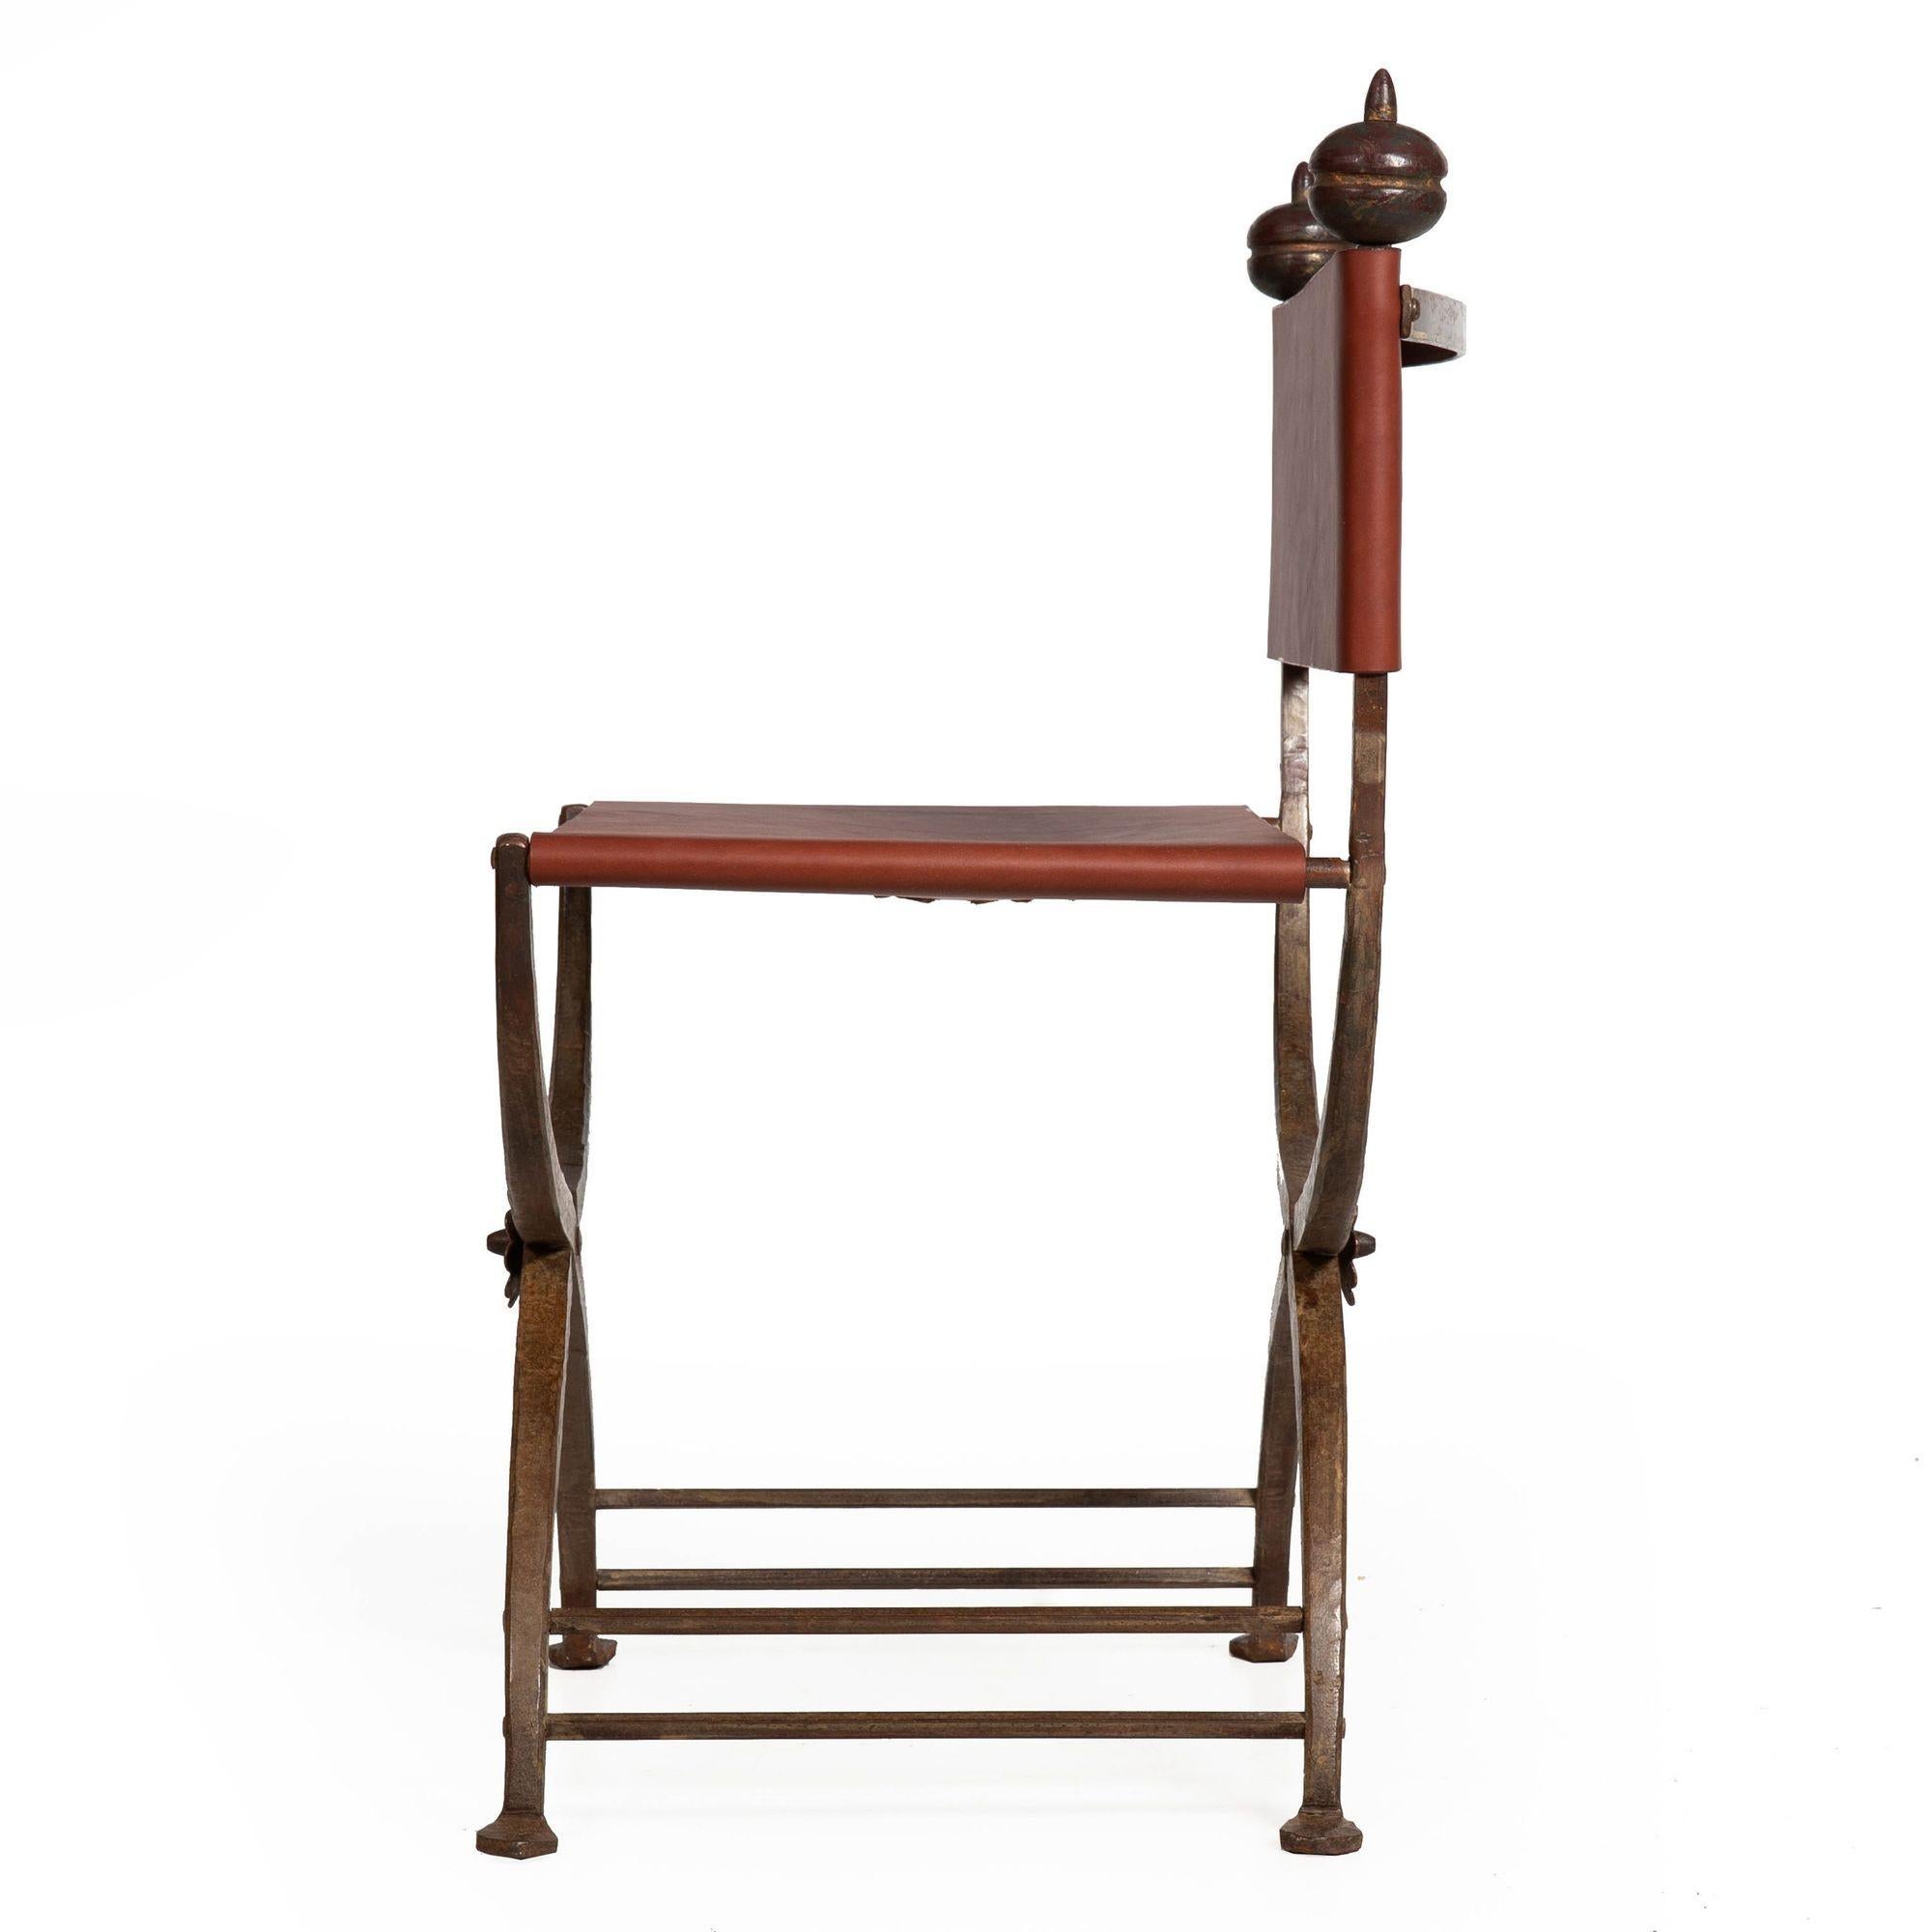 European Antique Wrought-Iron and Leather Savonarola Chair, early 20th century For Sale